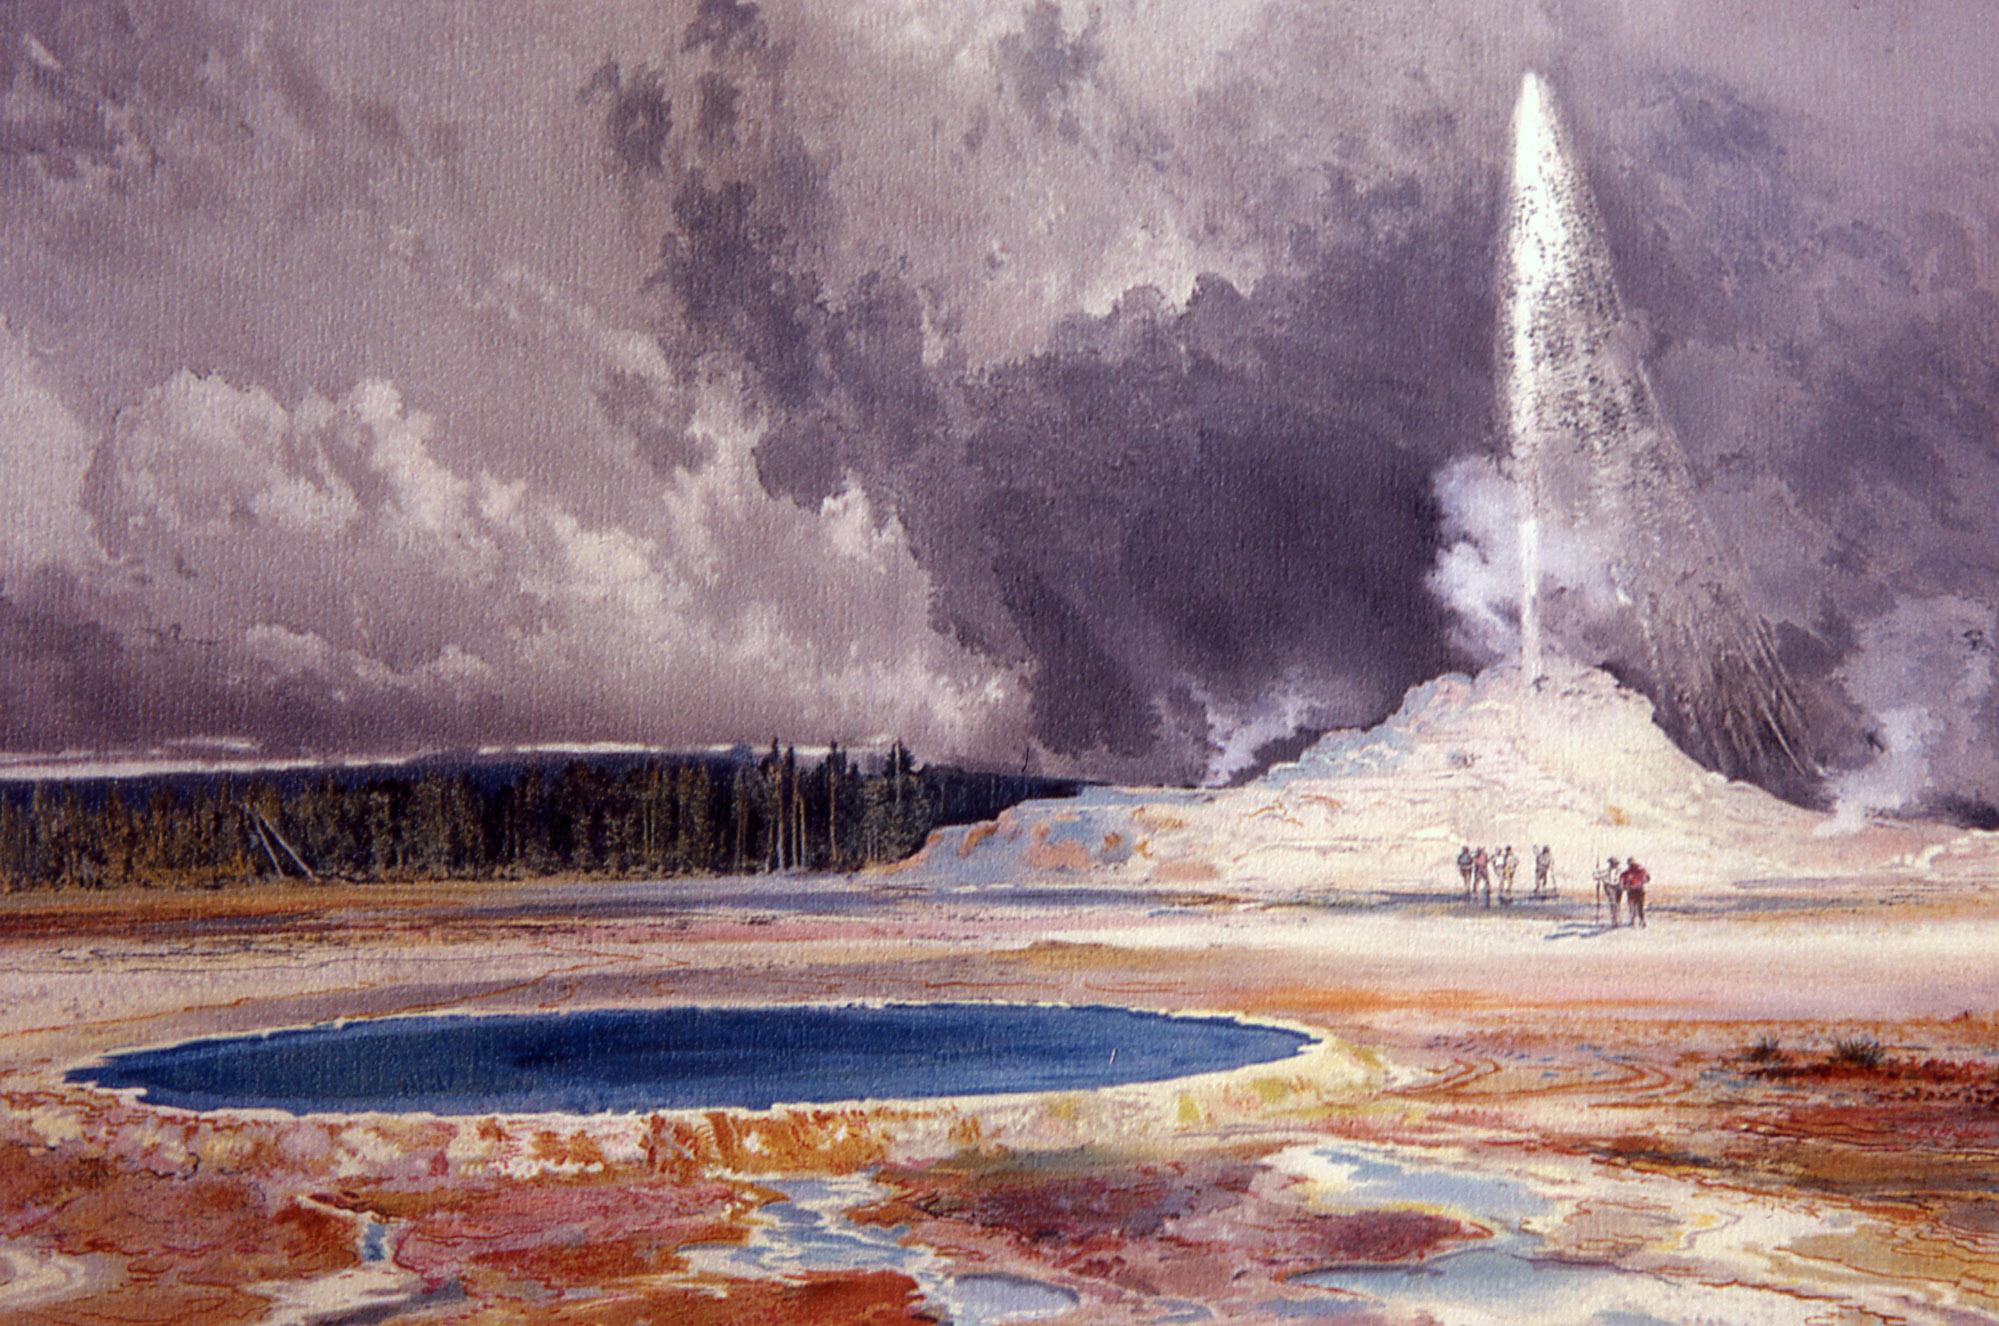 Philanthropy is vital to national parks, but it carries risks/LOC, Thomas Moran print of Castle Geyser